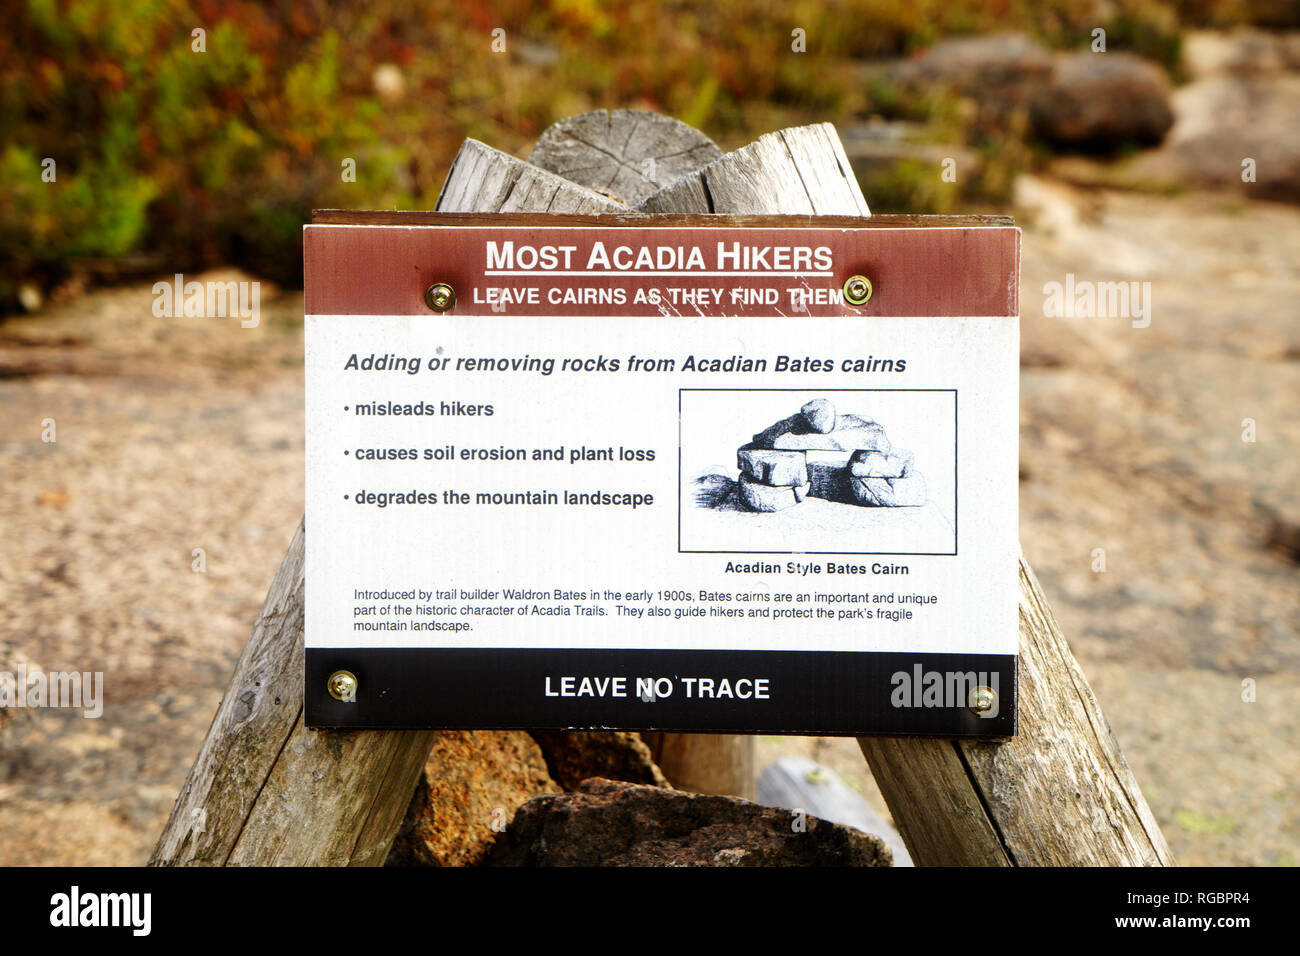 Sign warning hikers to leave Acadian Bates cairns as they find them.Acadia National Park, Maine, USA. Stock Photo